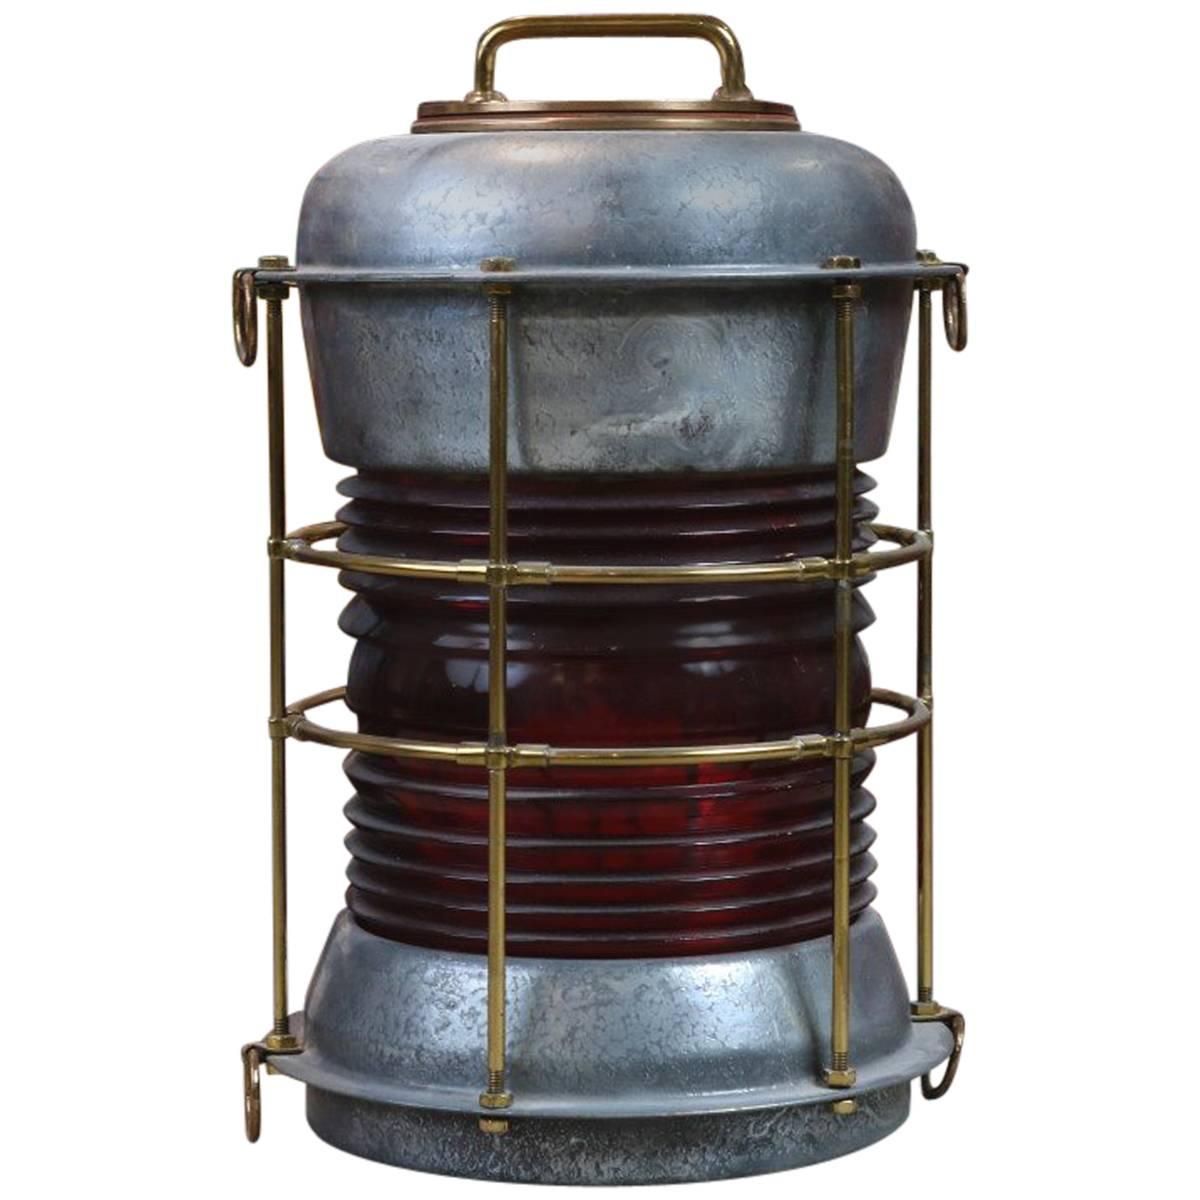 Durkee Marine Ship's Lantern with Red Fresnel